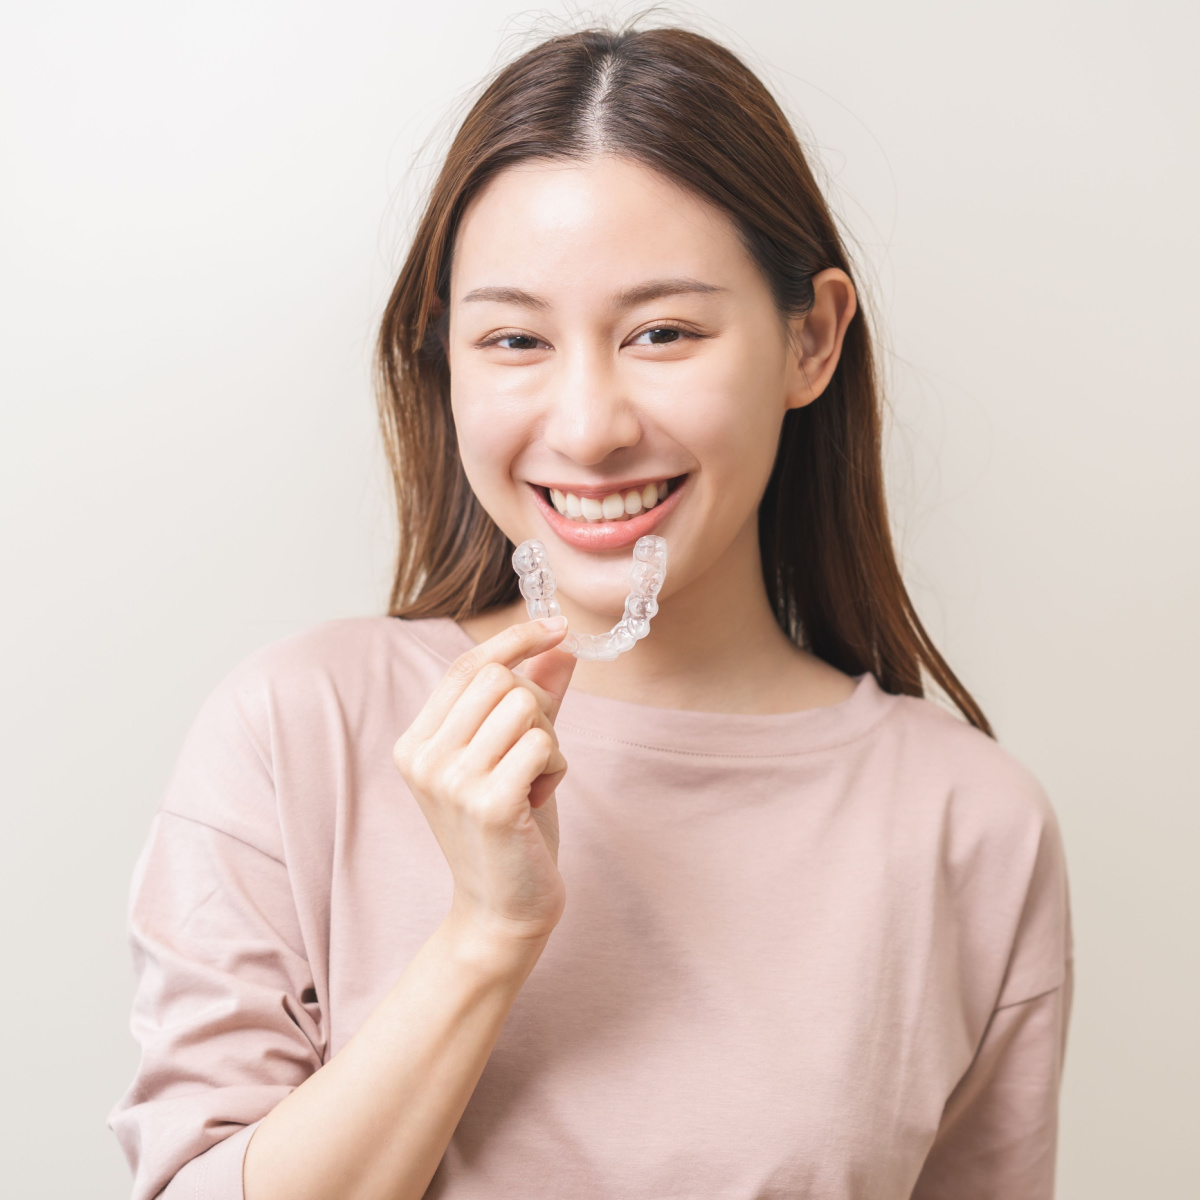 New Year, New Smile! Start the Year Off Right with Houston Invisalign